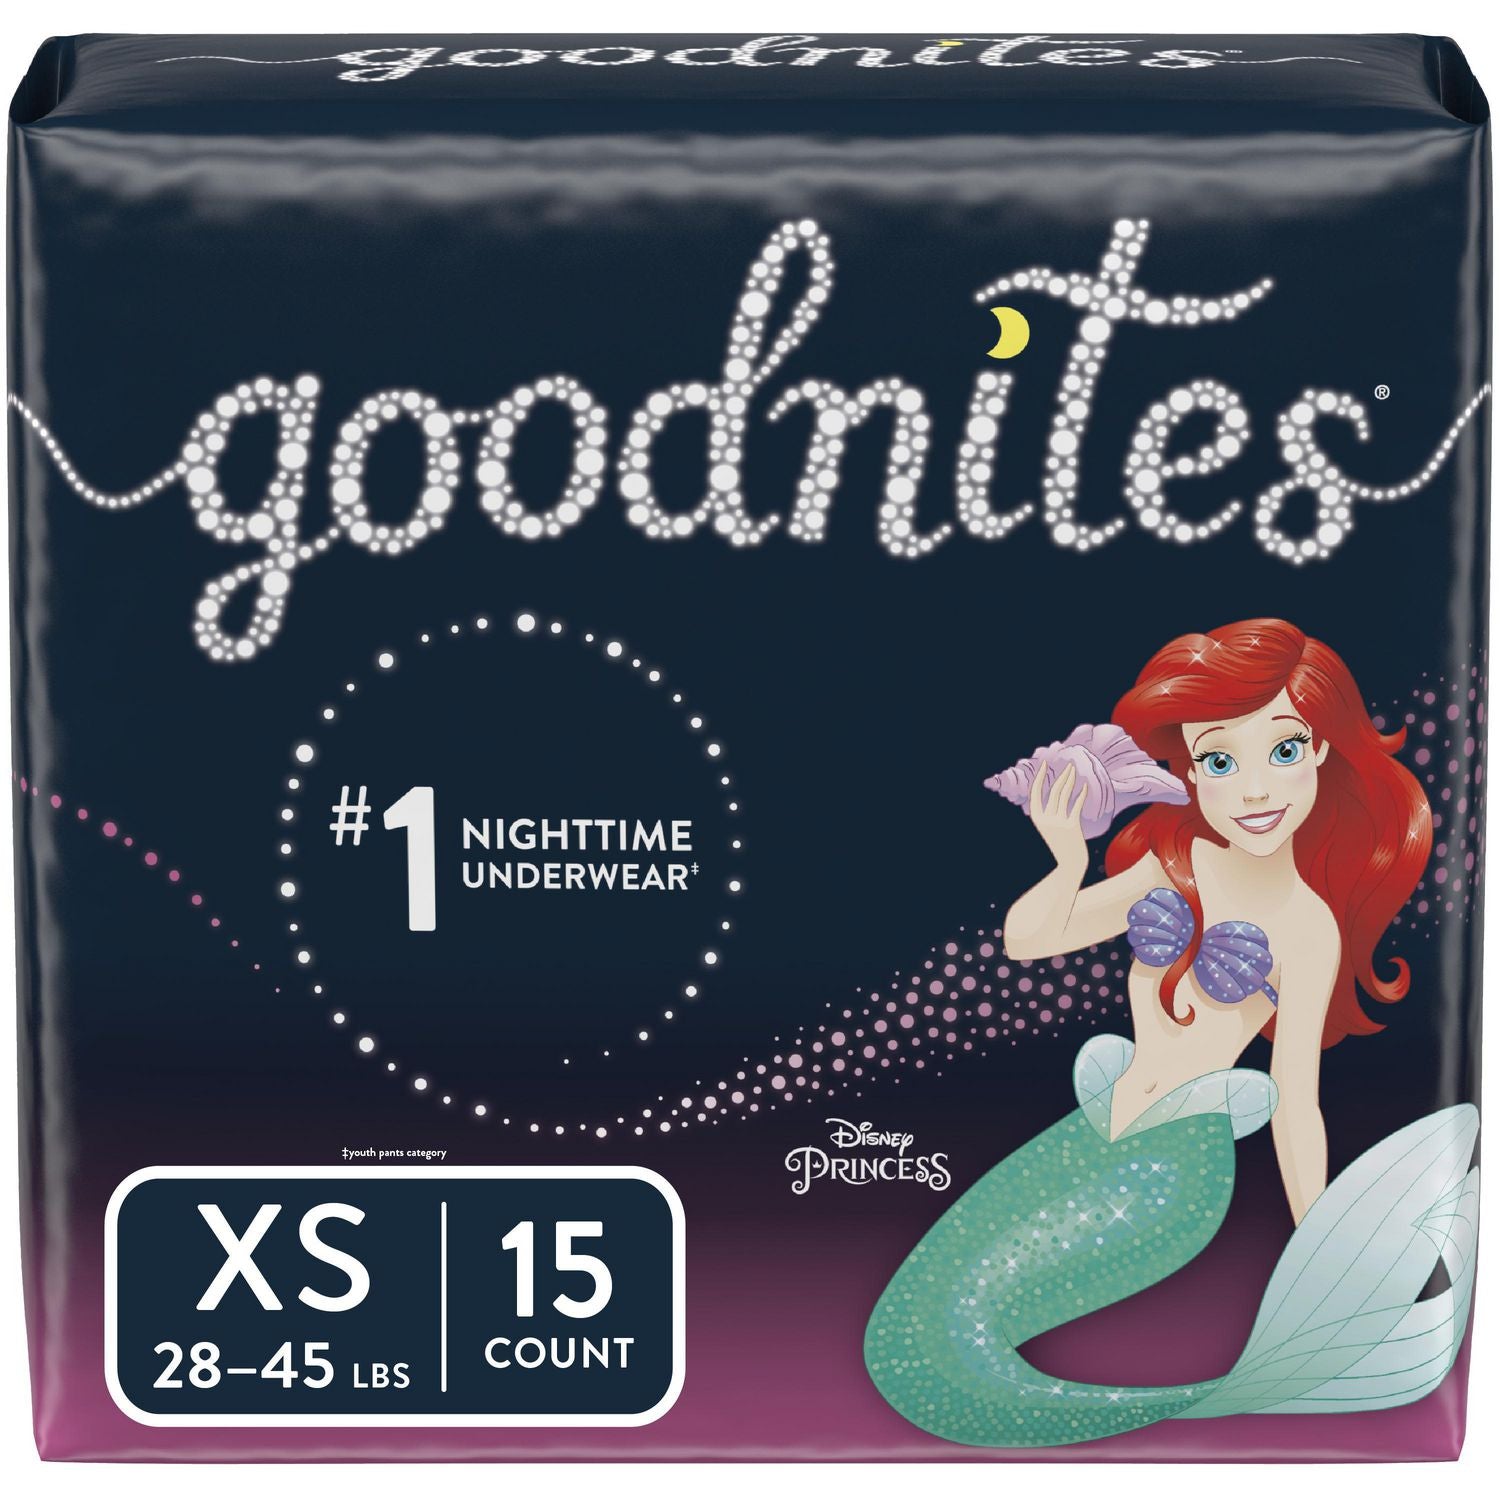 GoodNites Nighttime Underwear for Girls, Extra Small - 15 count